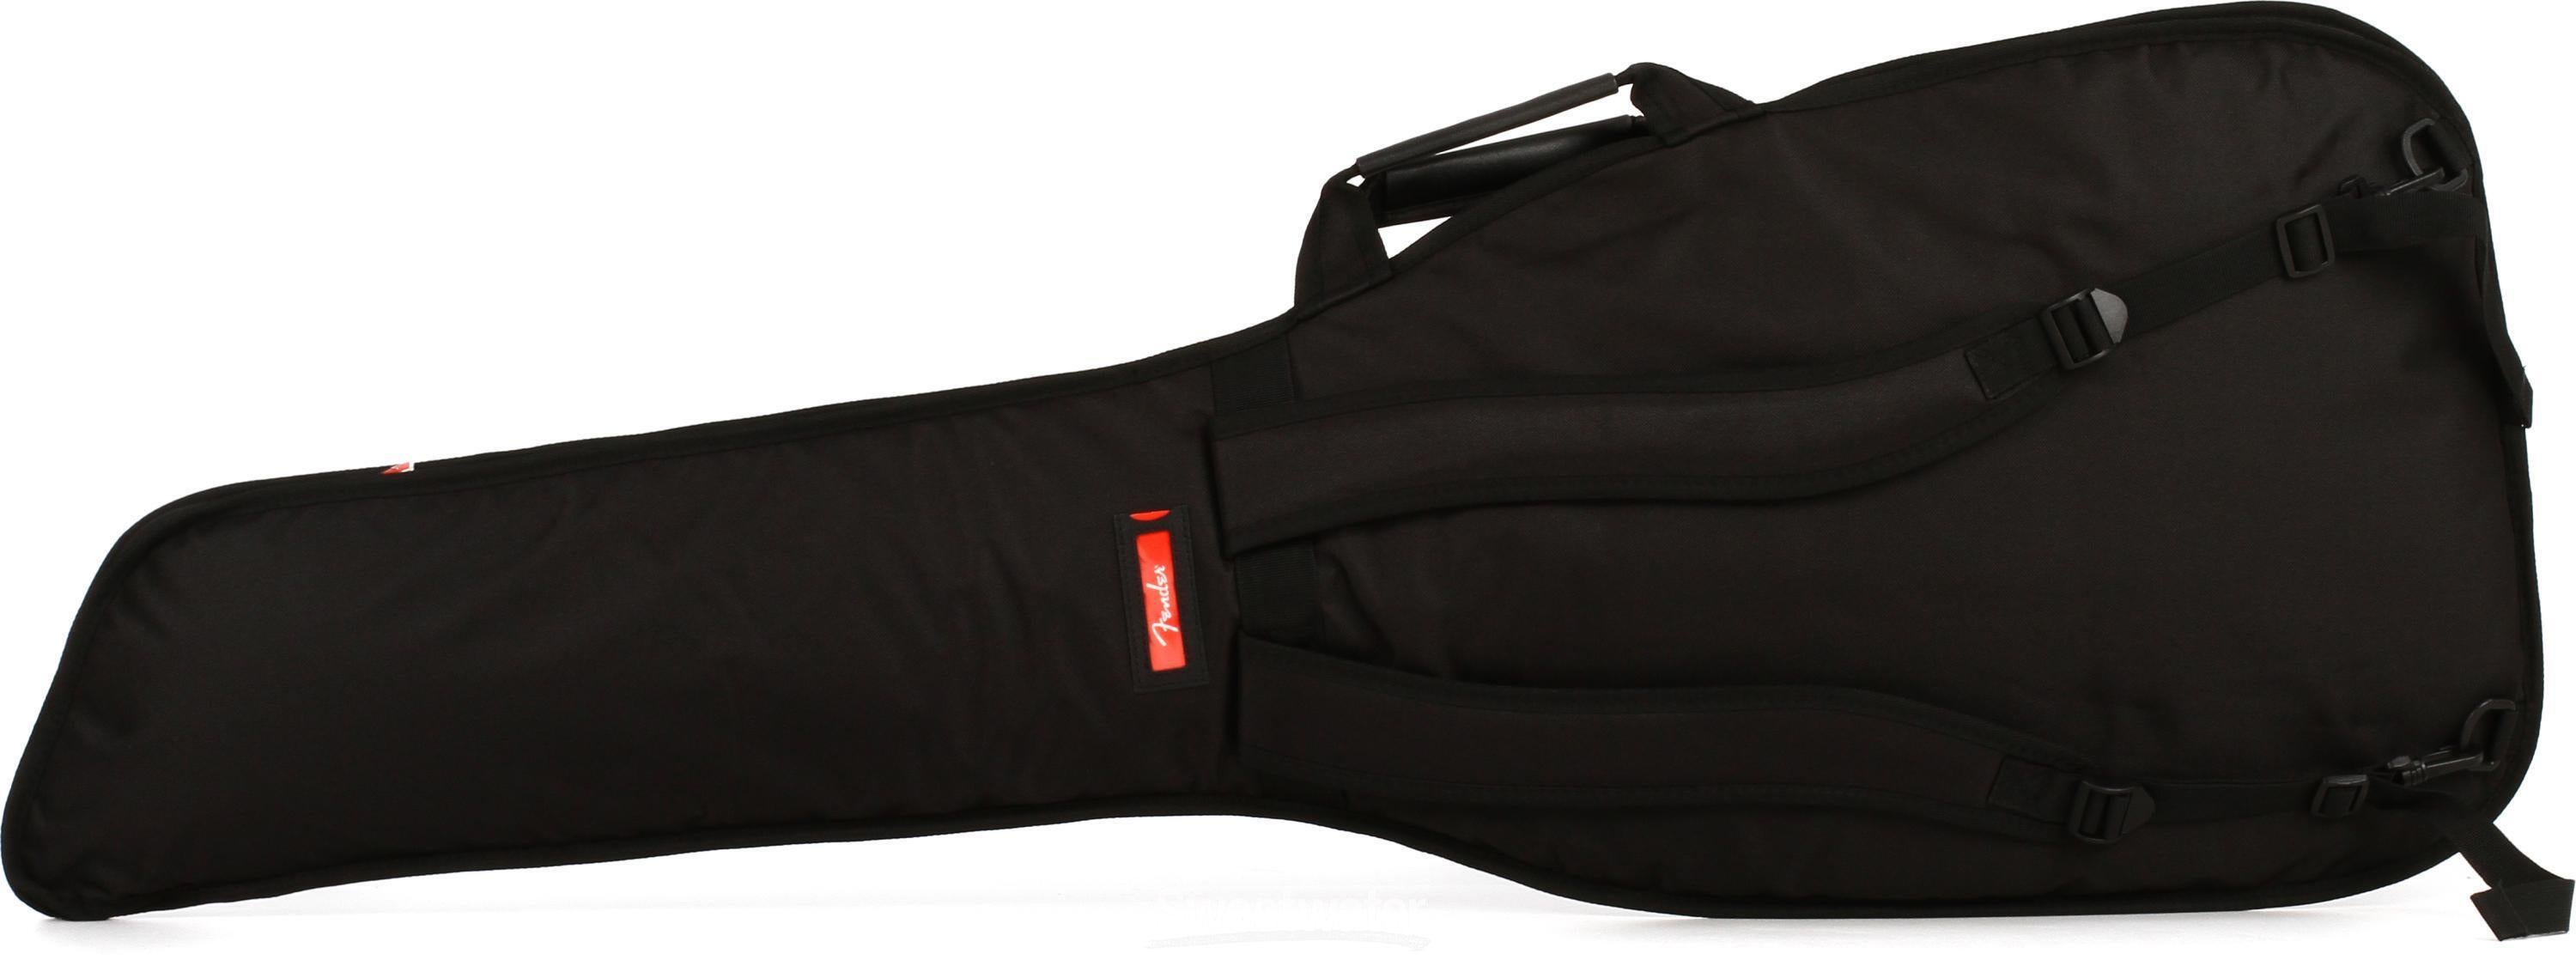 Fender FBSS-610 Short-scale Bass Gig Bag - Black | Sweetwater